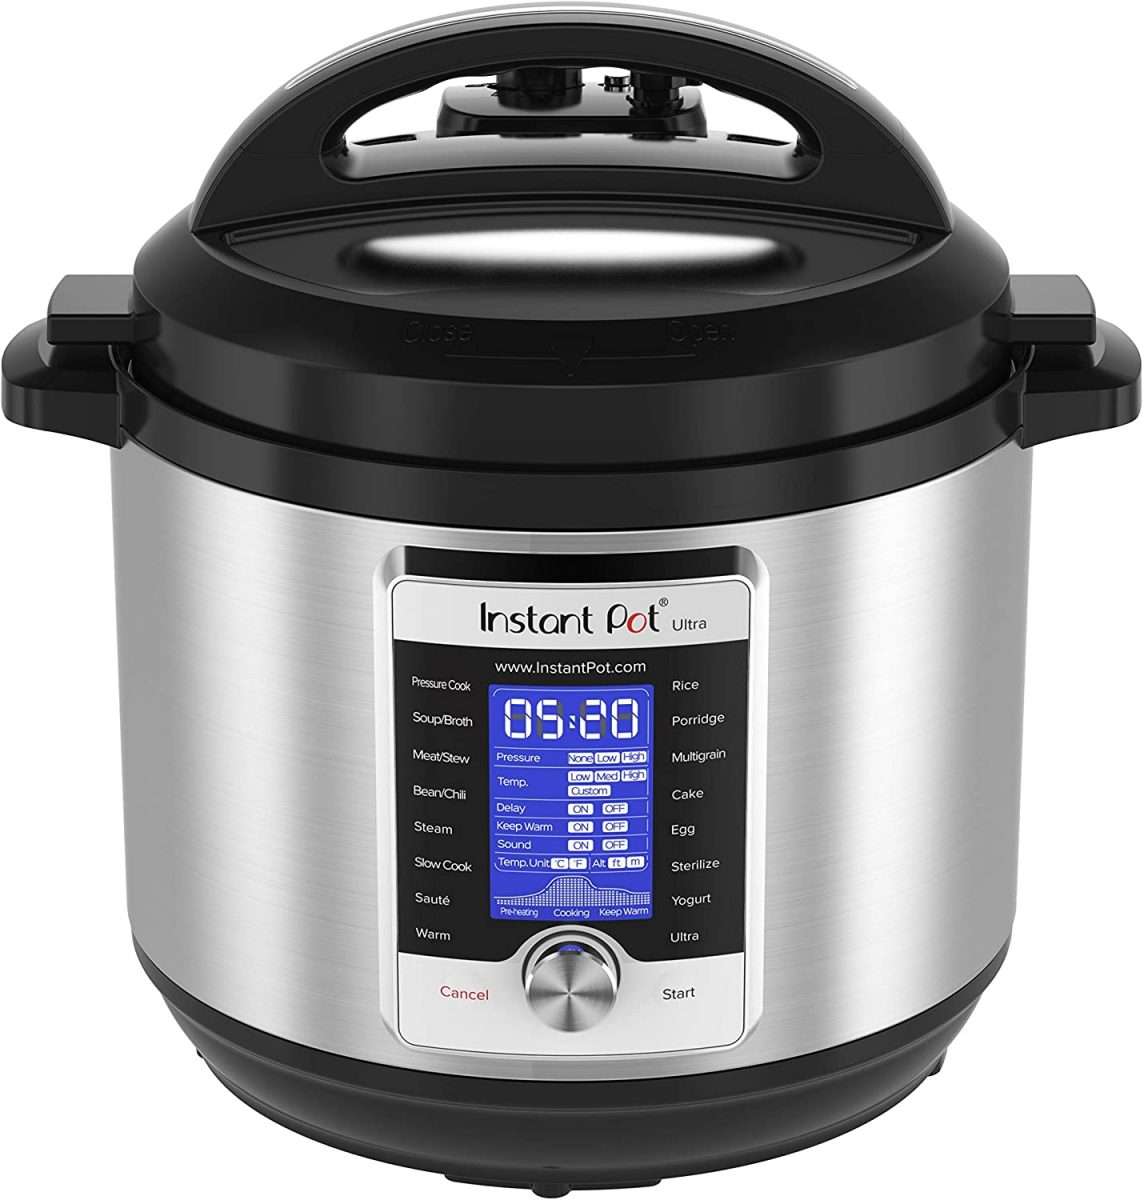 Instant Pot Ultra pressure cookers discounted up to 39 percent off